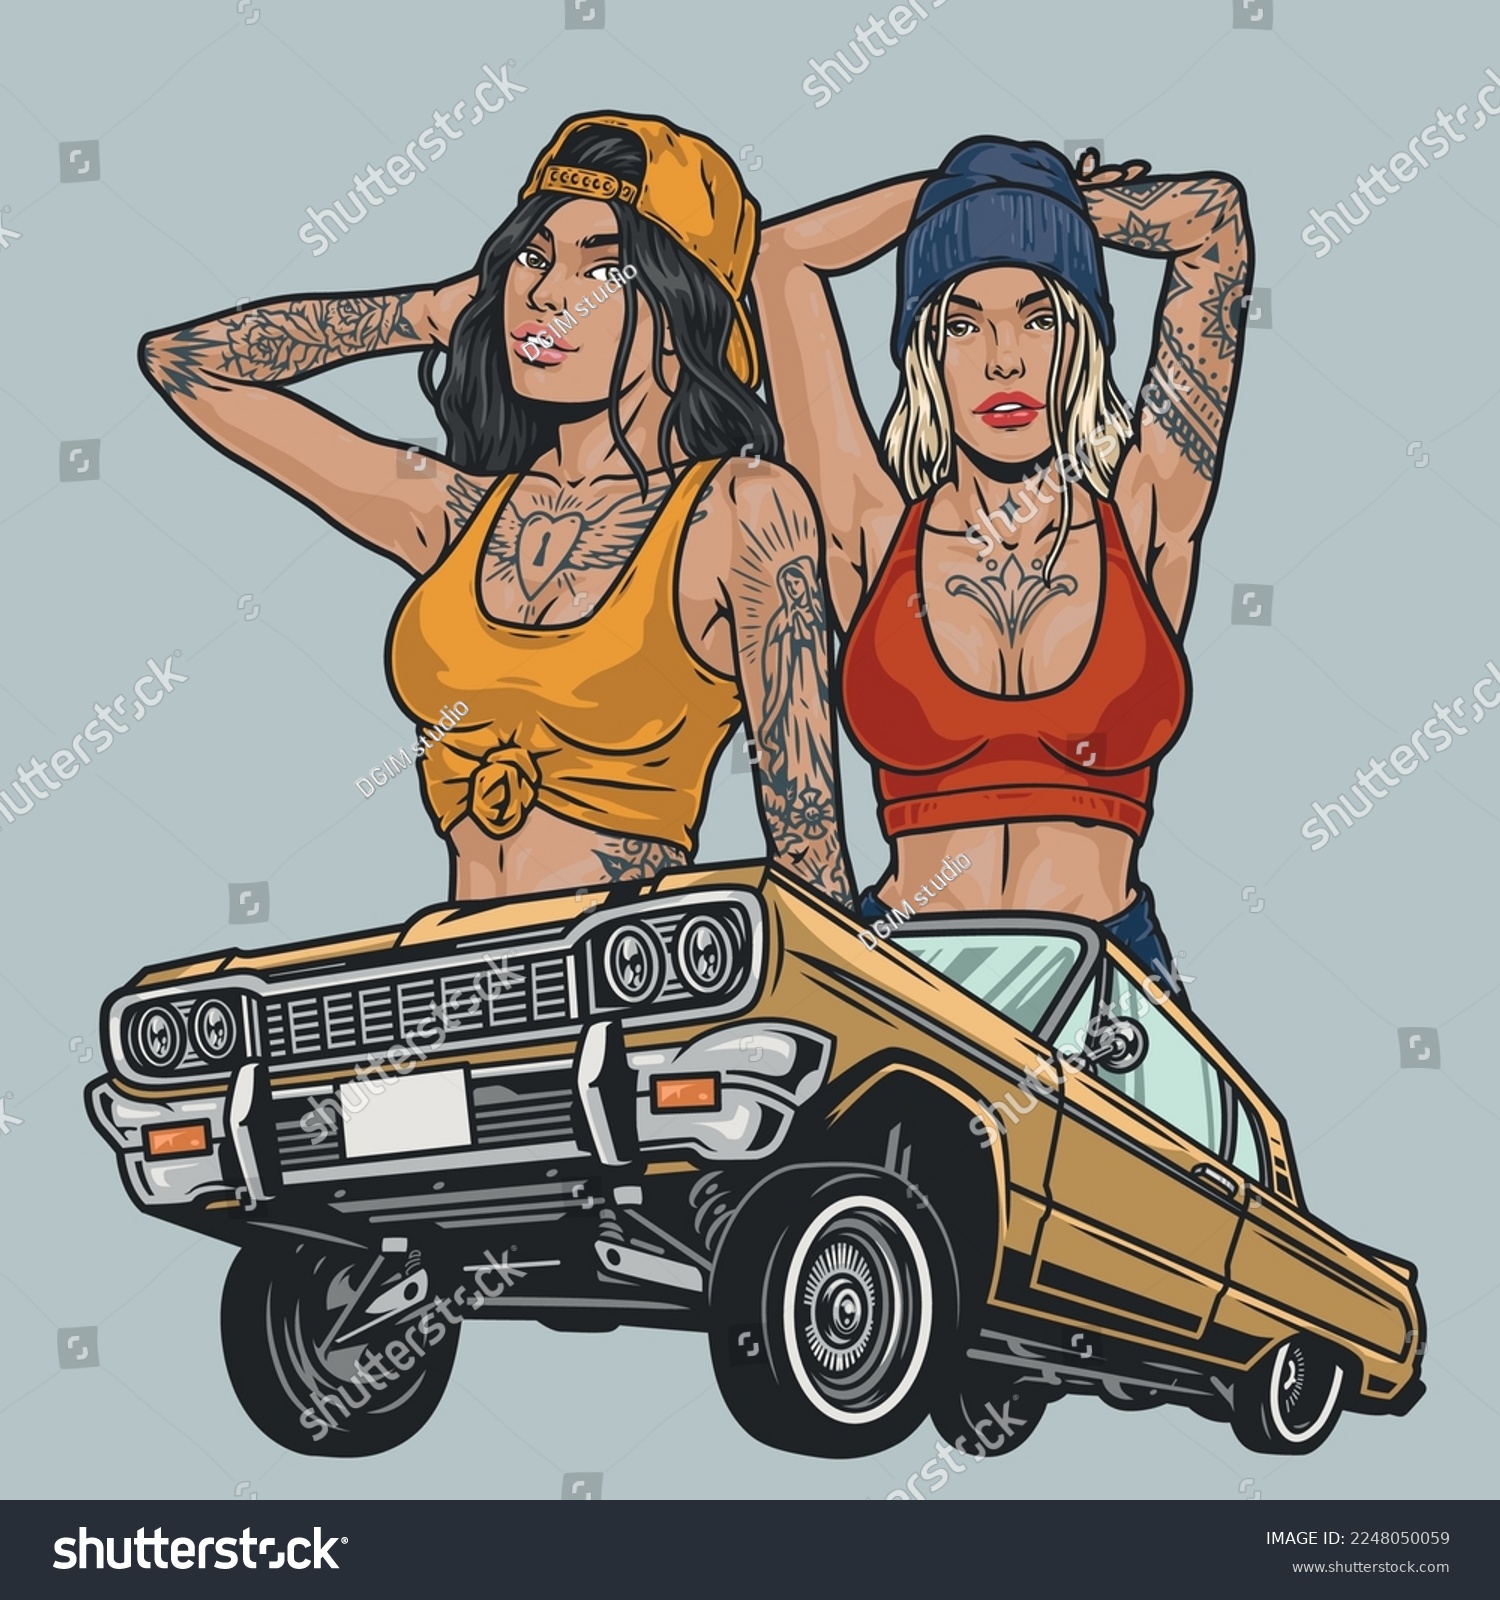 SVG of Girls and wheelbarrow colorful label beautiful models with tattoos in stylish clothes and car for lowrider subculture vector illustration svg